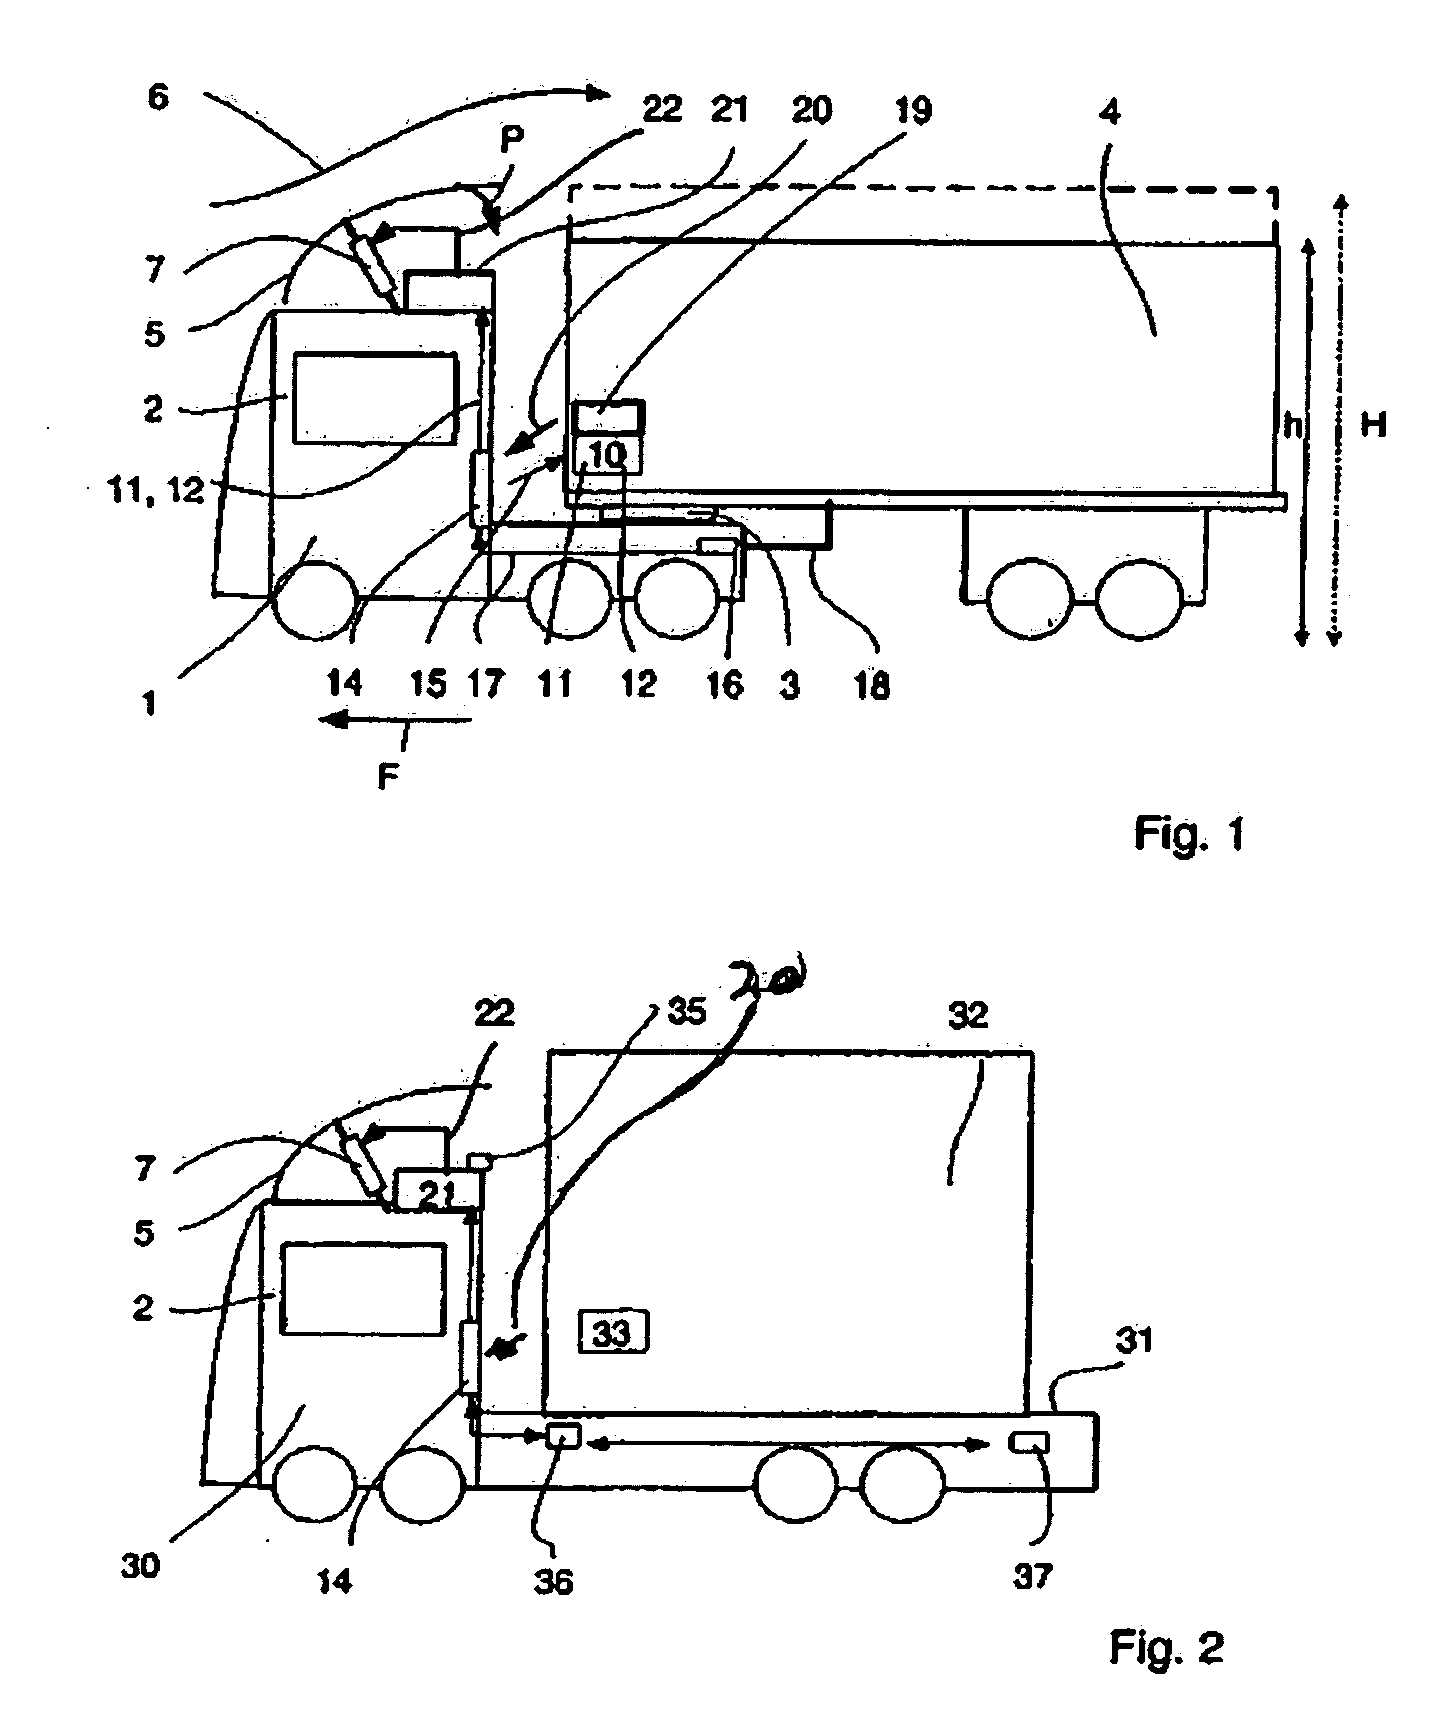 Apparatus for the airflow-optimized orientation of an airflow deflector